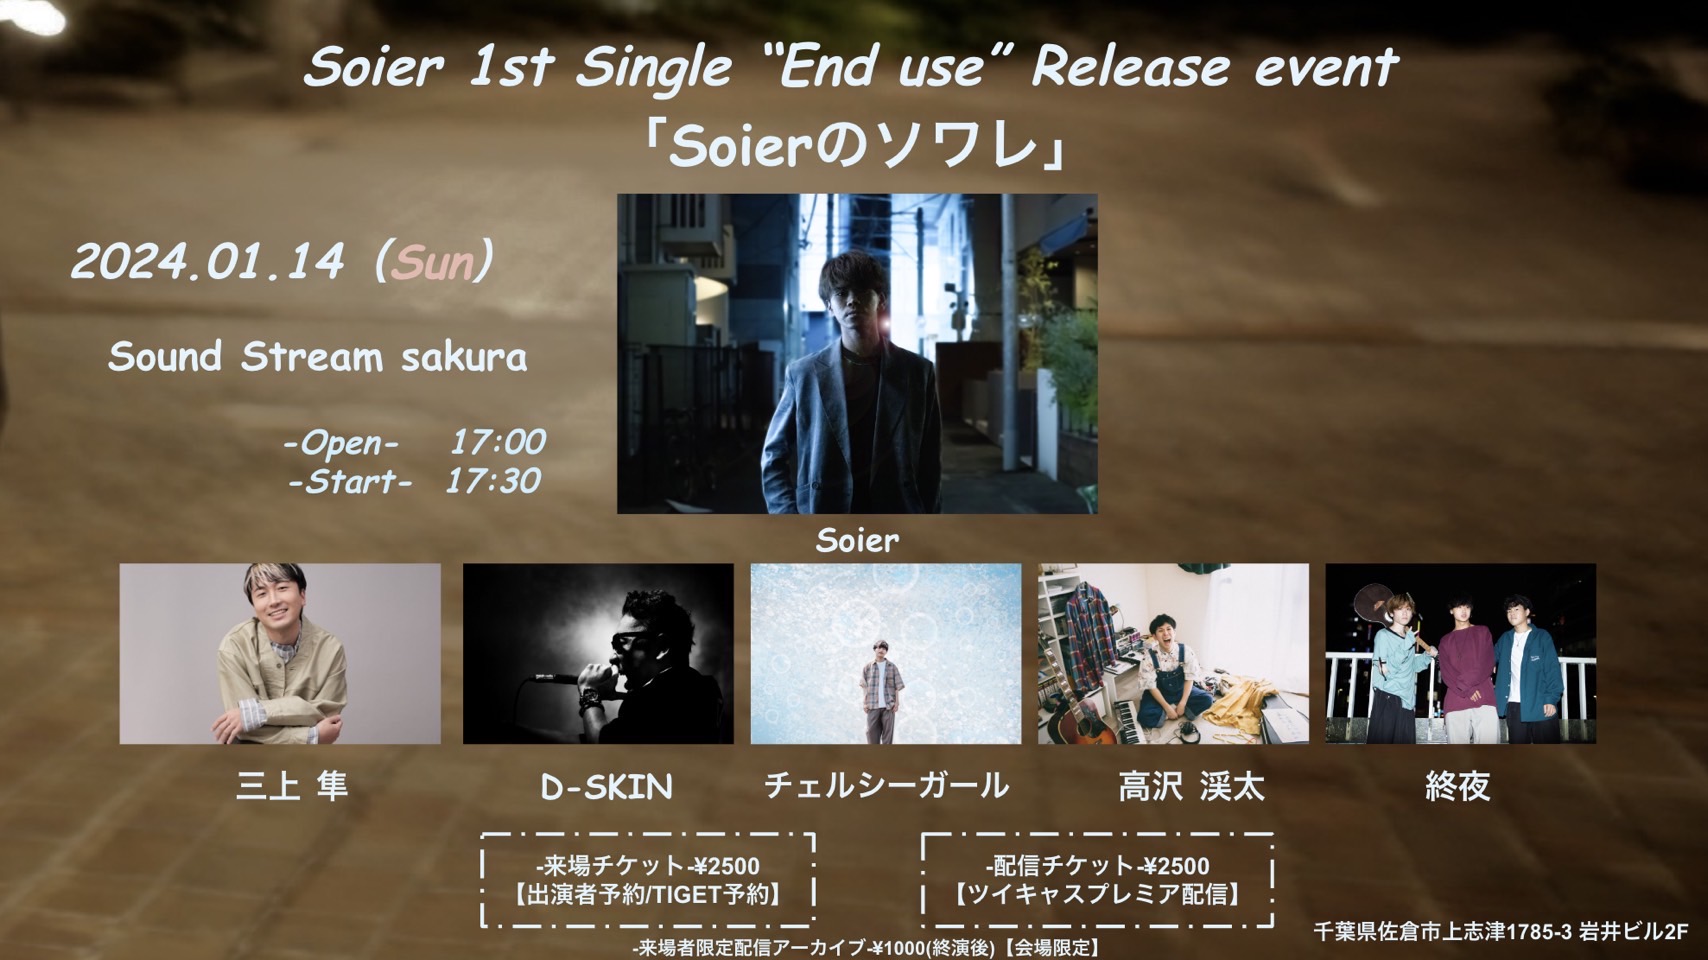 Soier 1st Single”End use”Release event 「Soierのソワレ」